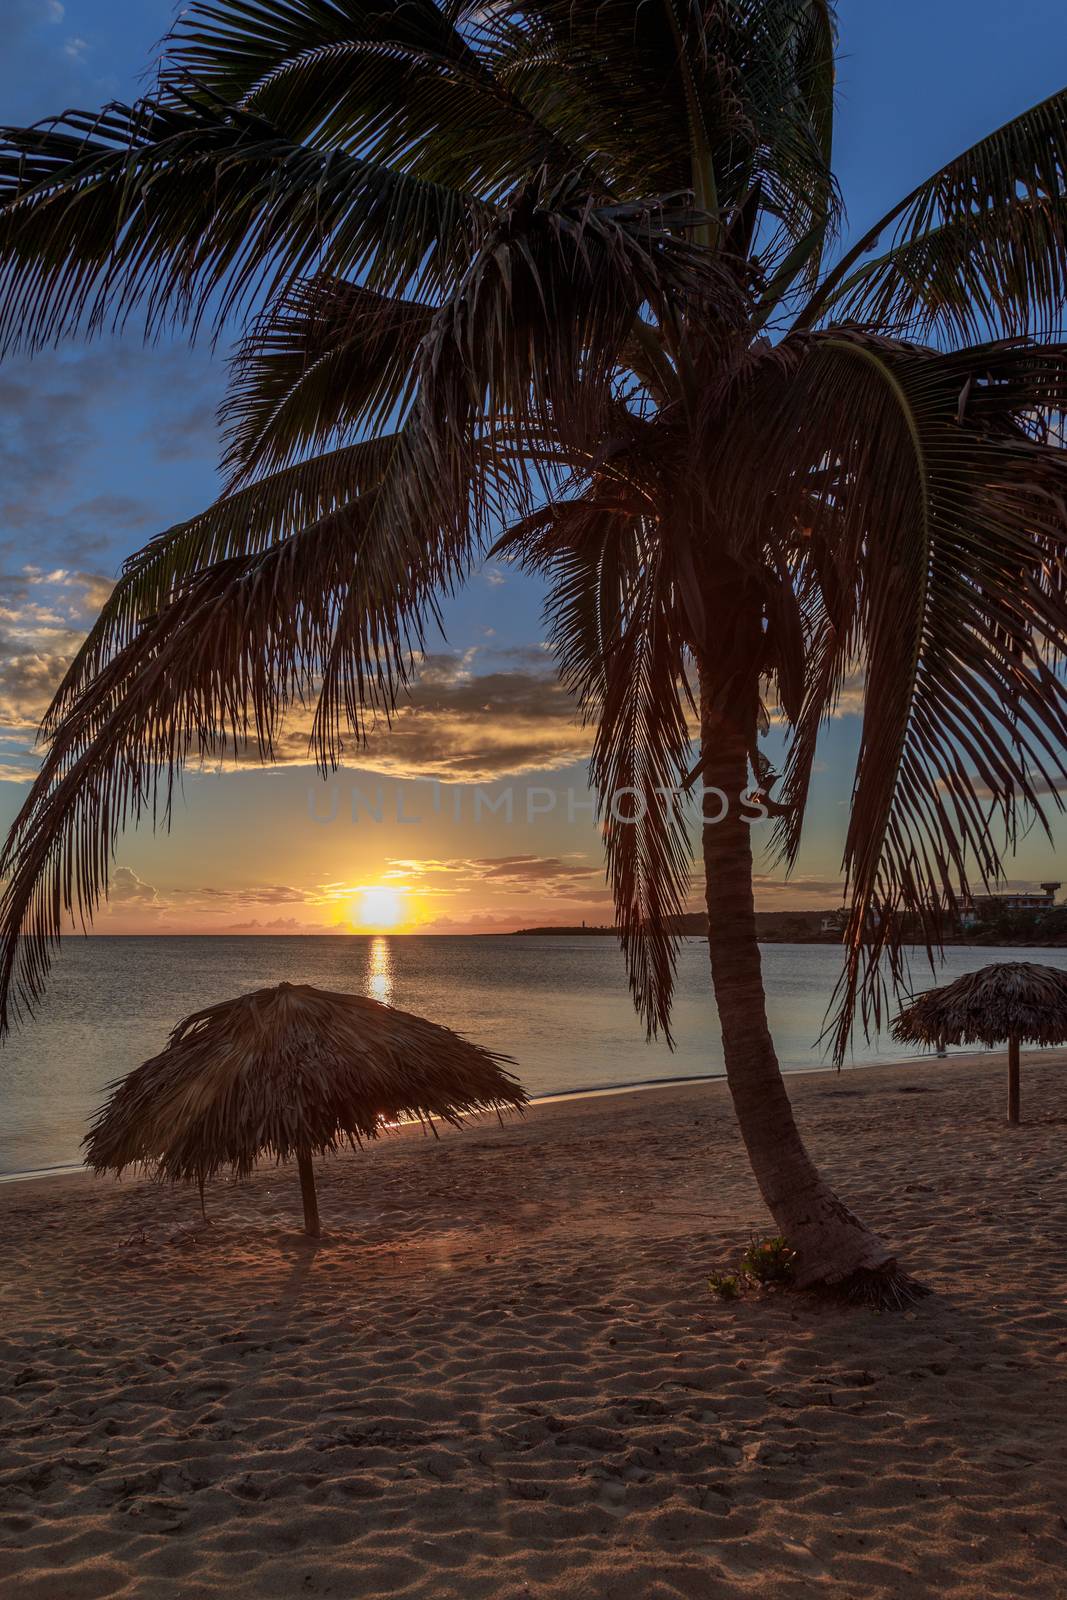 Rancho Luna caribbean beach with palms and straw umbrellas on the shore, sunset view, Cienfuegos, Cuba